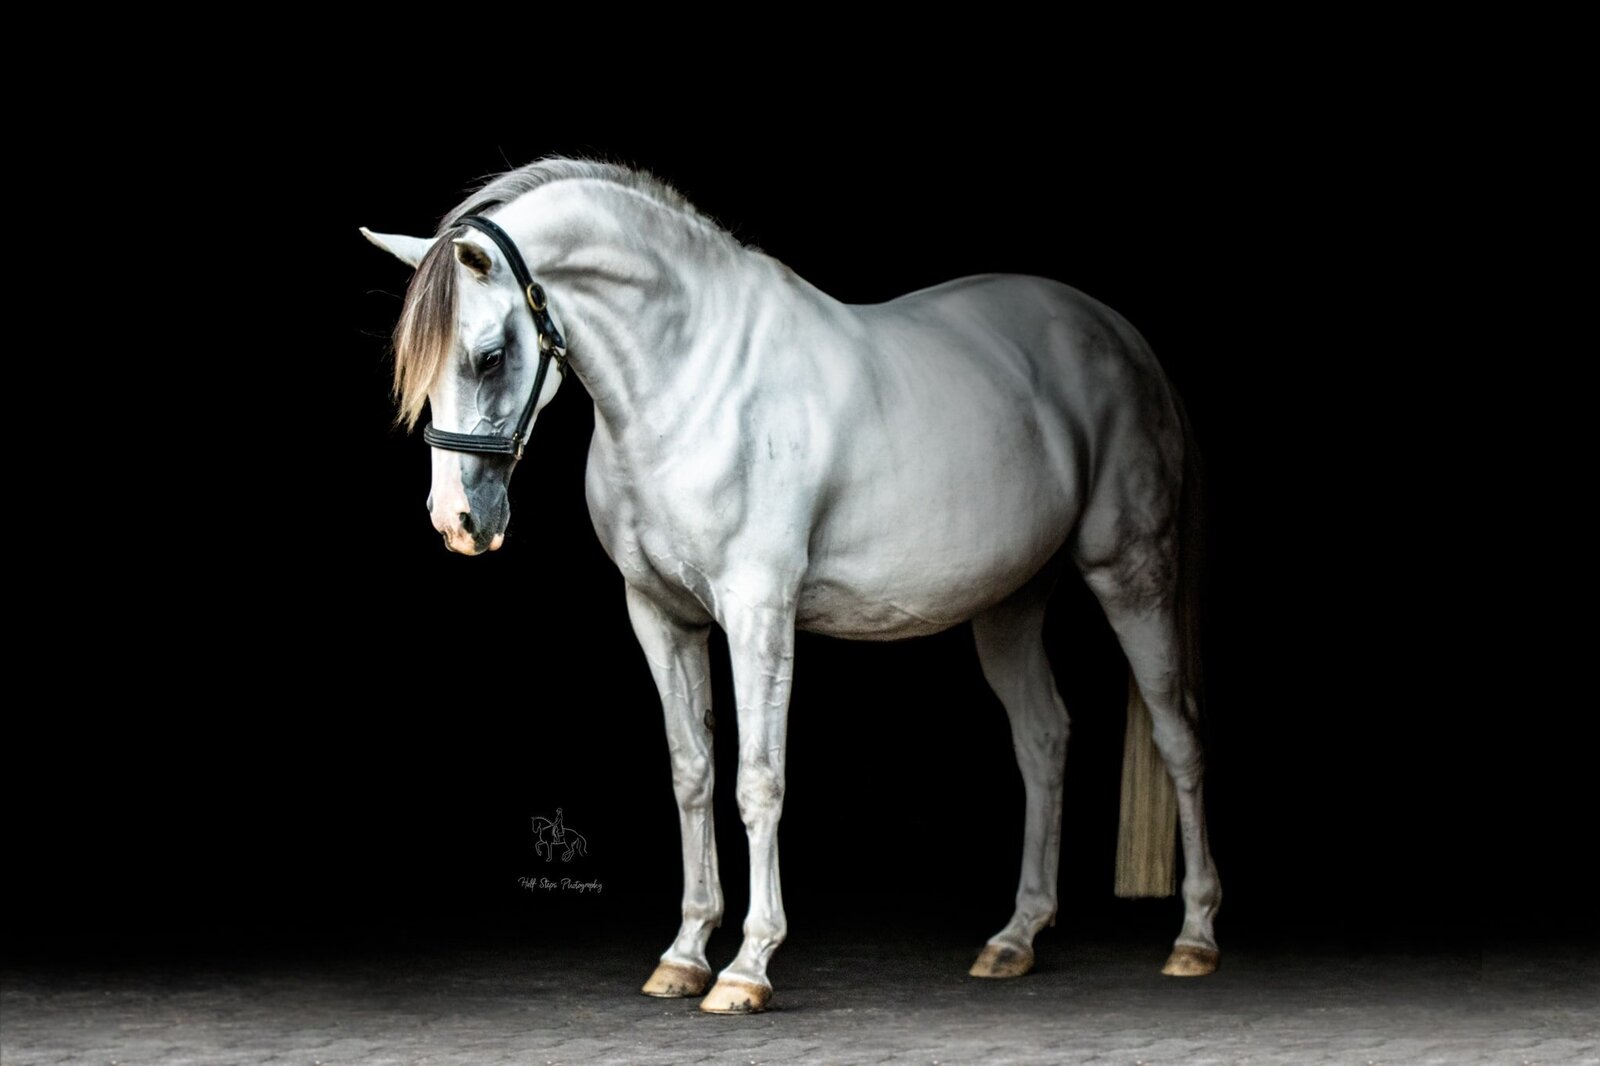 (57). Grey horse against black background arching neck Half Steps Photography